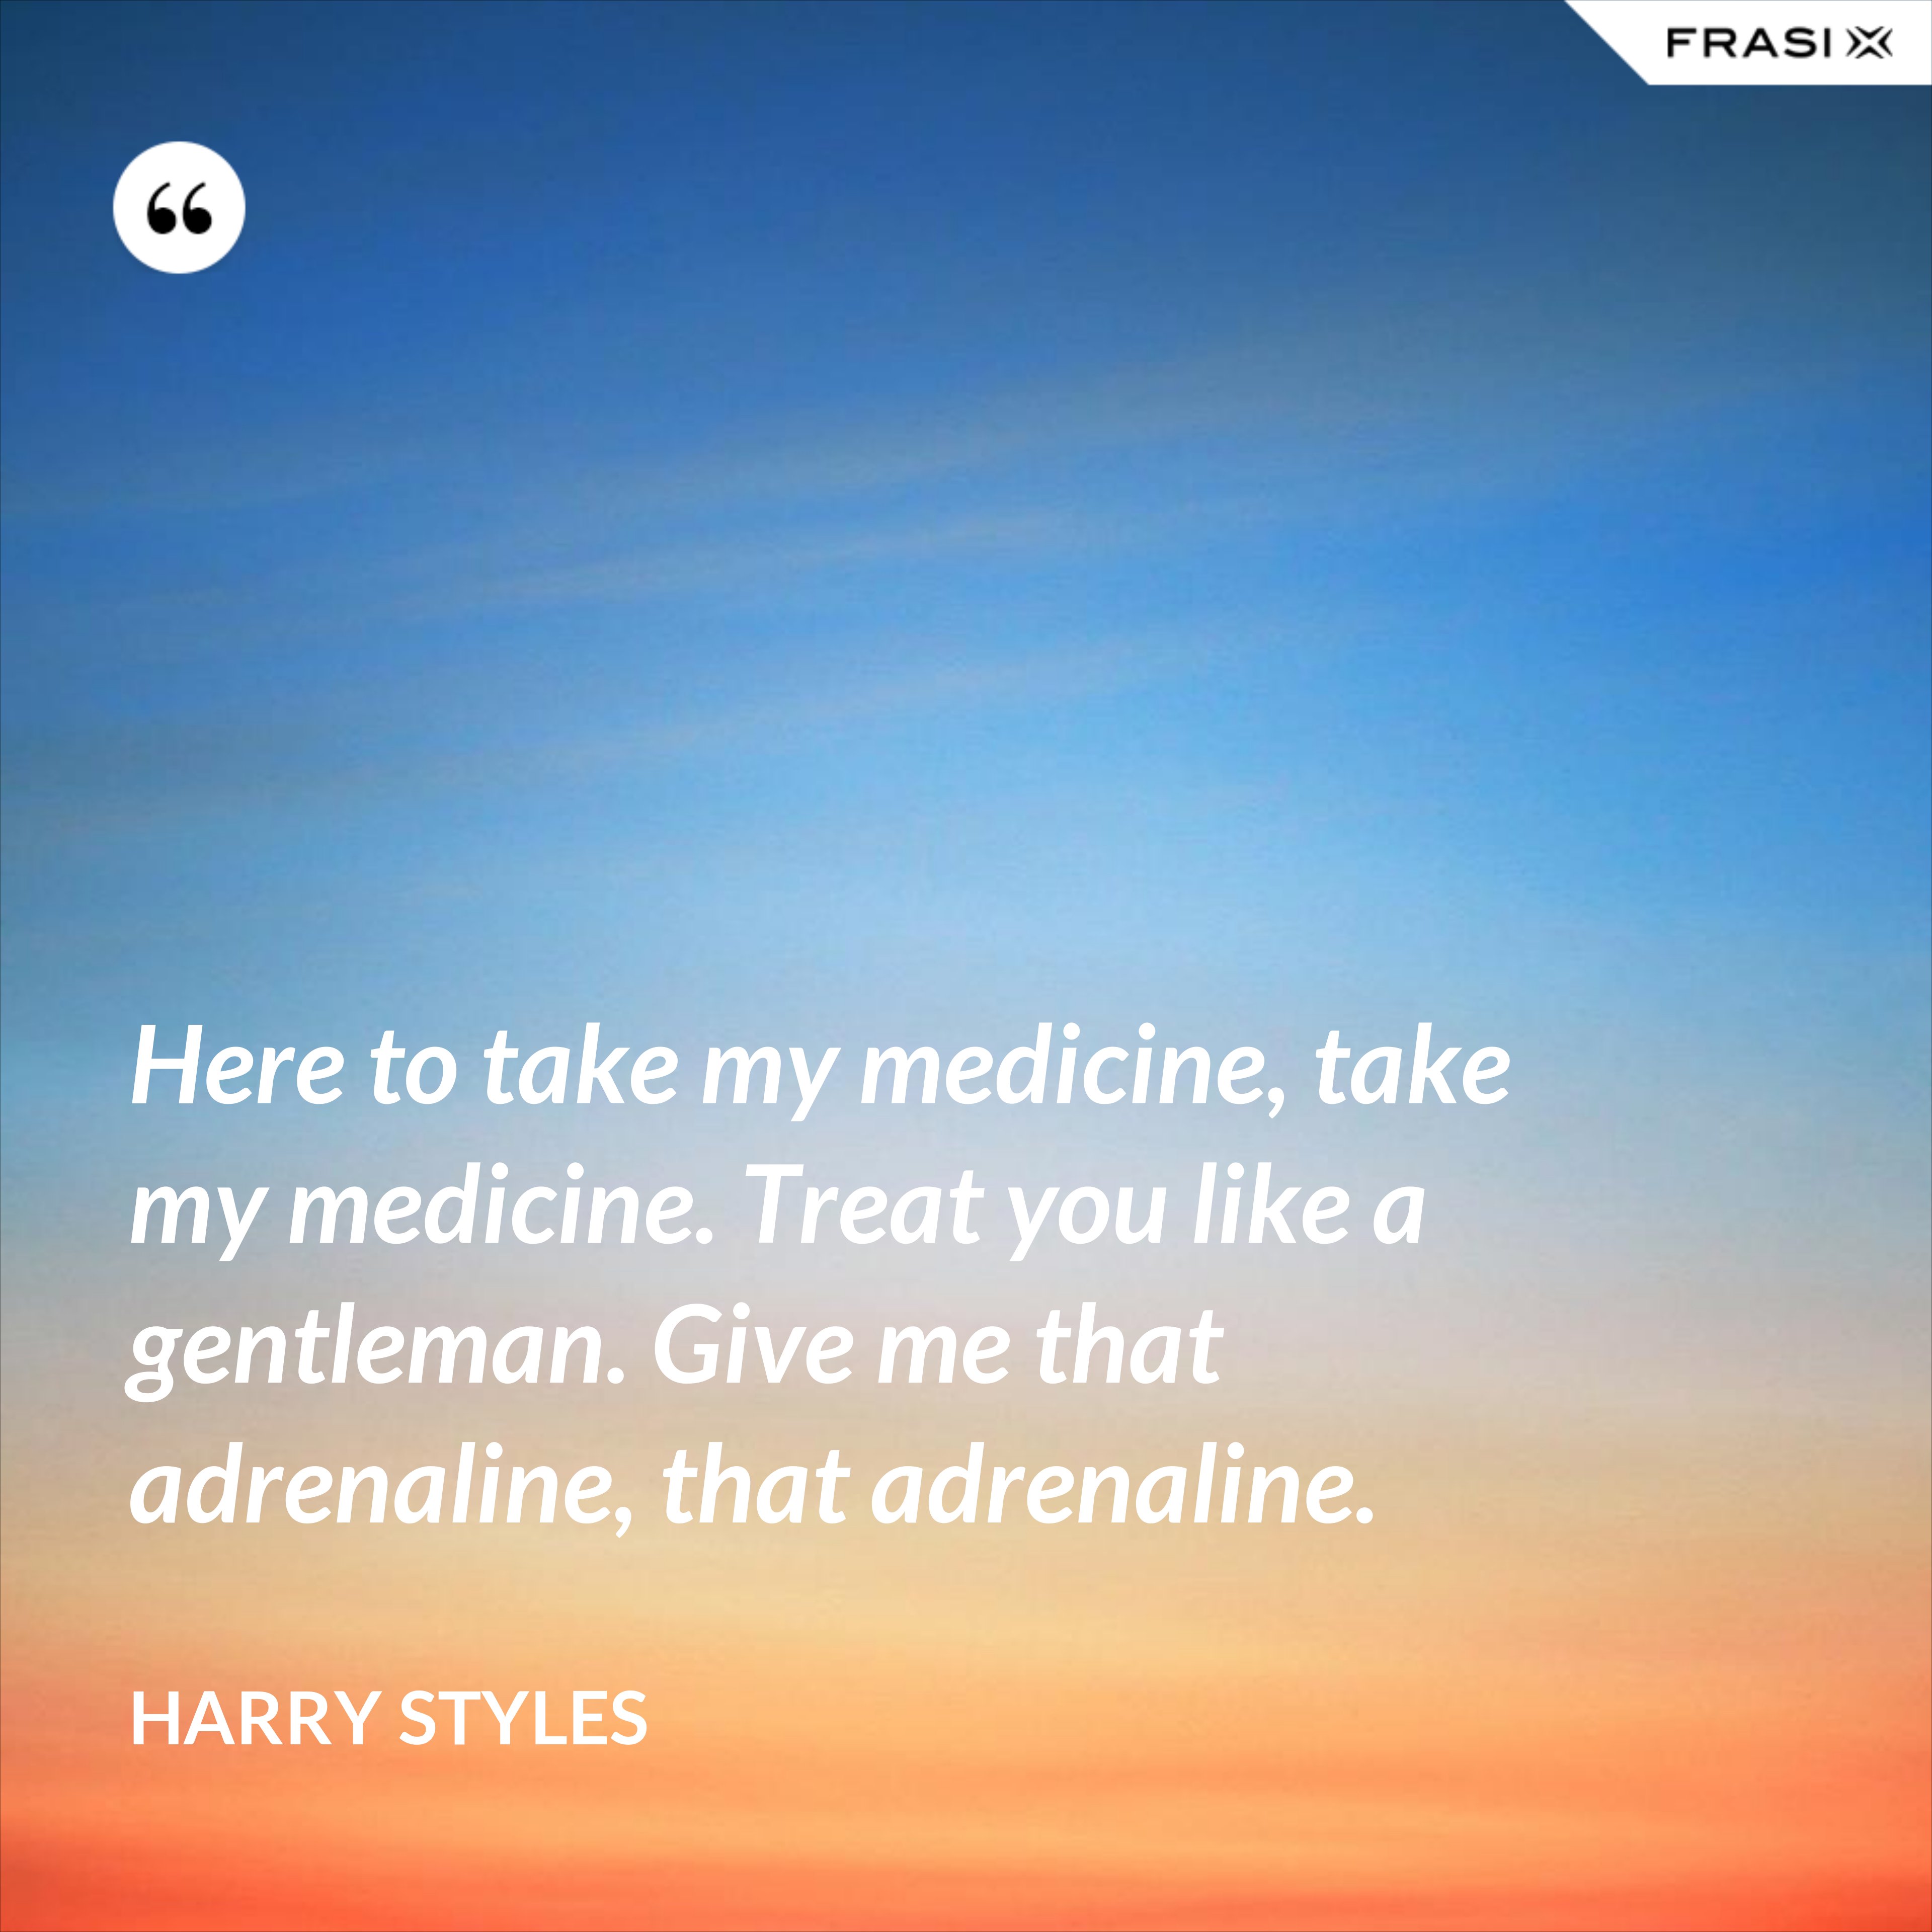 Here to take my medicine, take my medicine. Treat you like a gentleman. Give me that adrenaline, that adrenaline. - Harry Styles